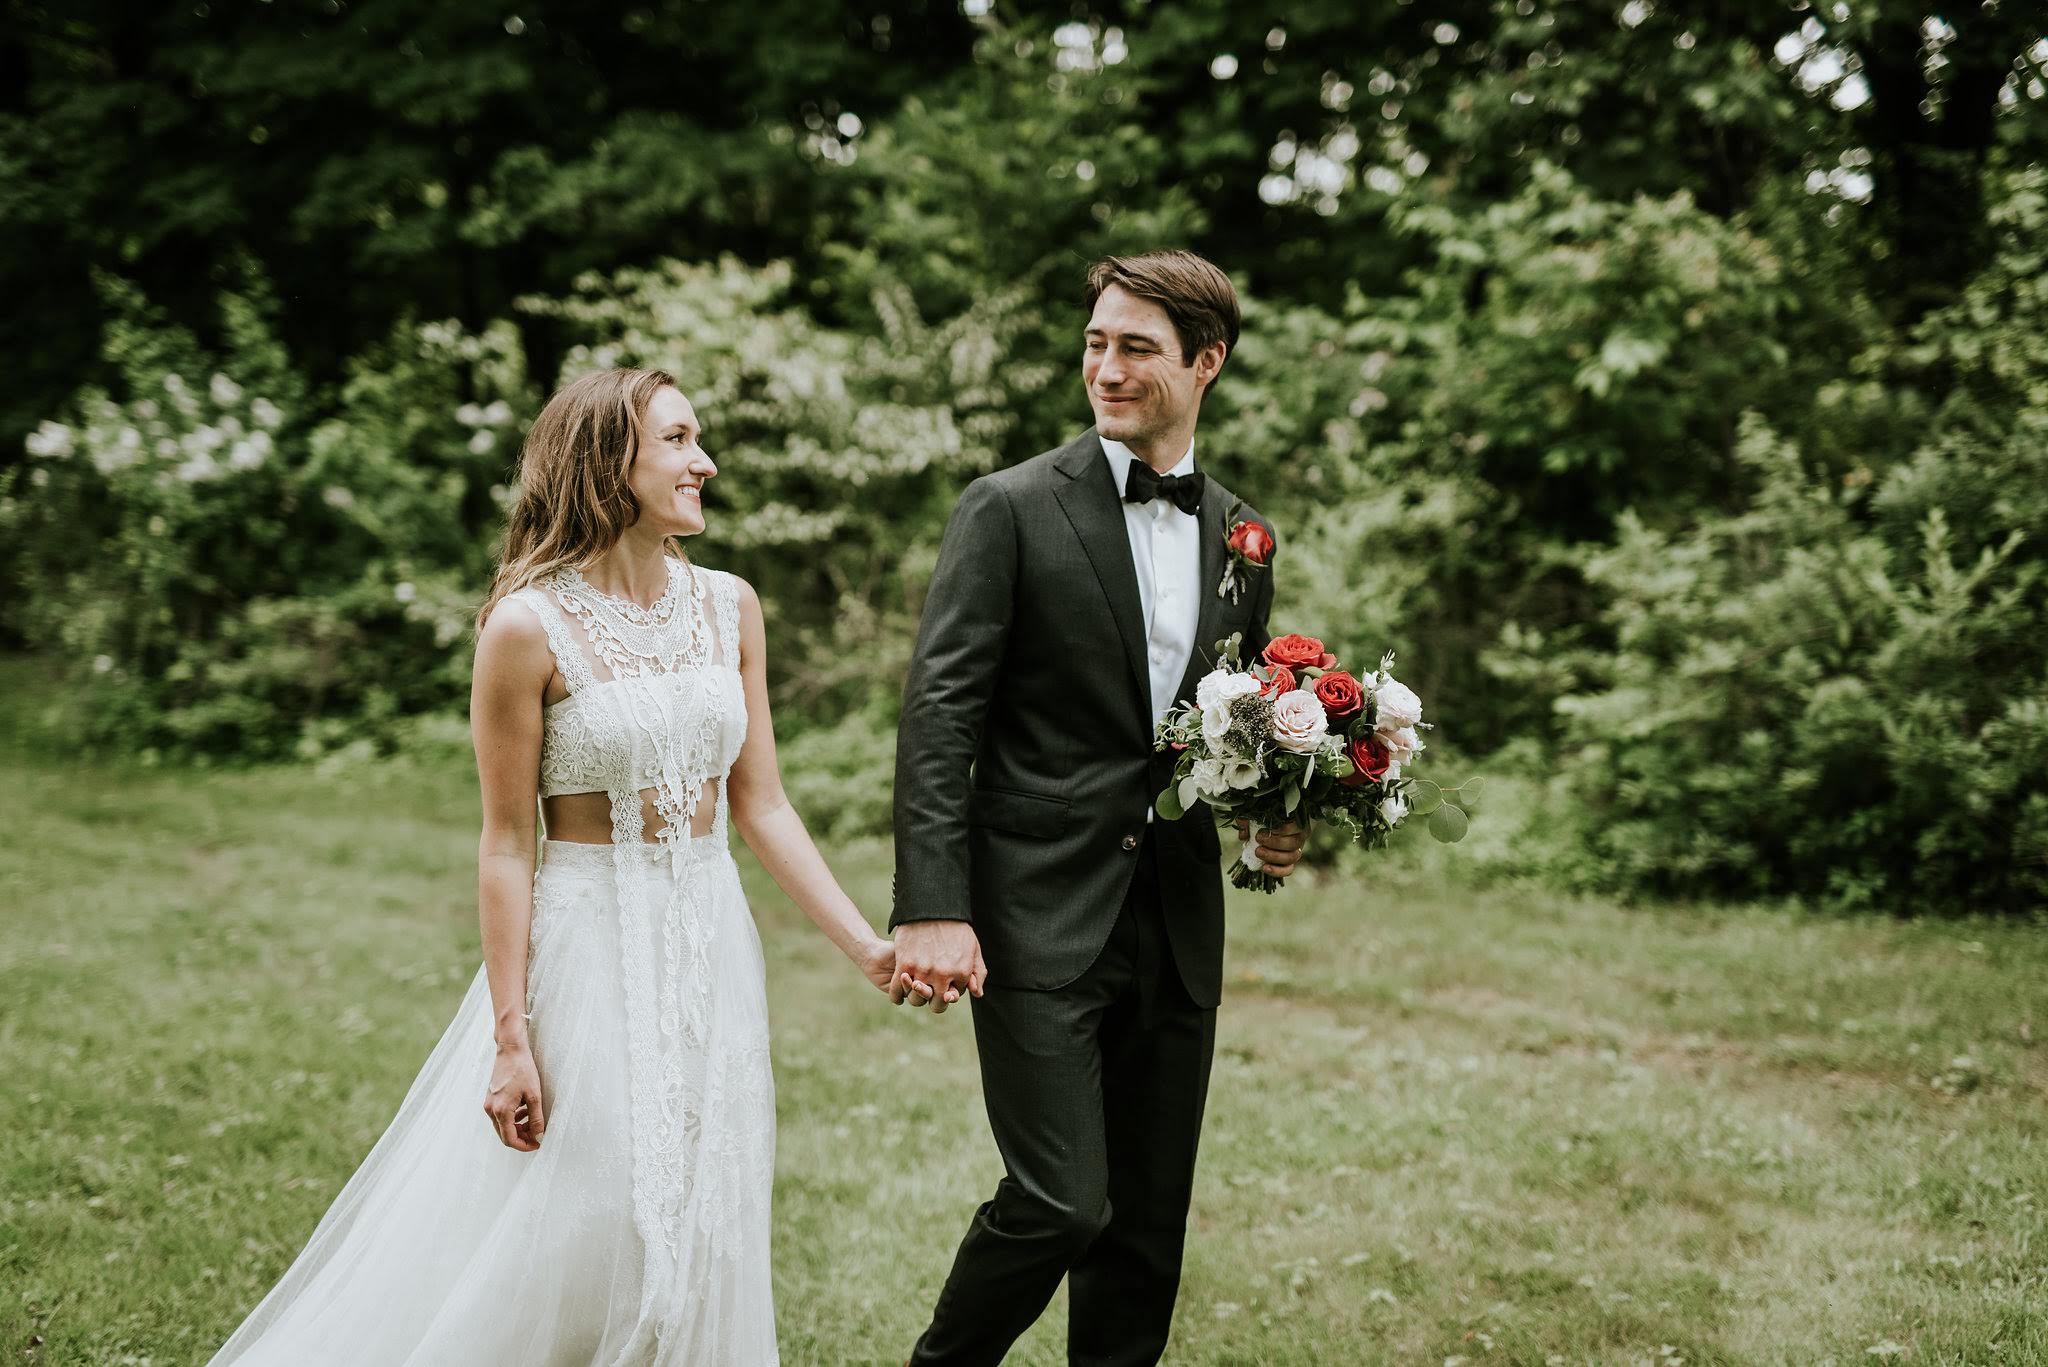 Bride and Groom outdoors at Inn at Barley Sheaf Farm. Bride carrying her garden-inspired old world romantic bouquet with specialty mauve-red roses, garden roses, spray roses and mixed eucalyptus greenery designed by Sebesta Design. Photography by M2 Photography.